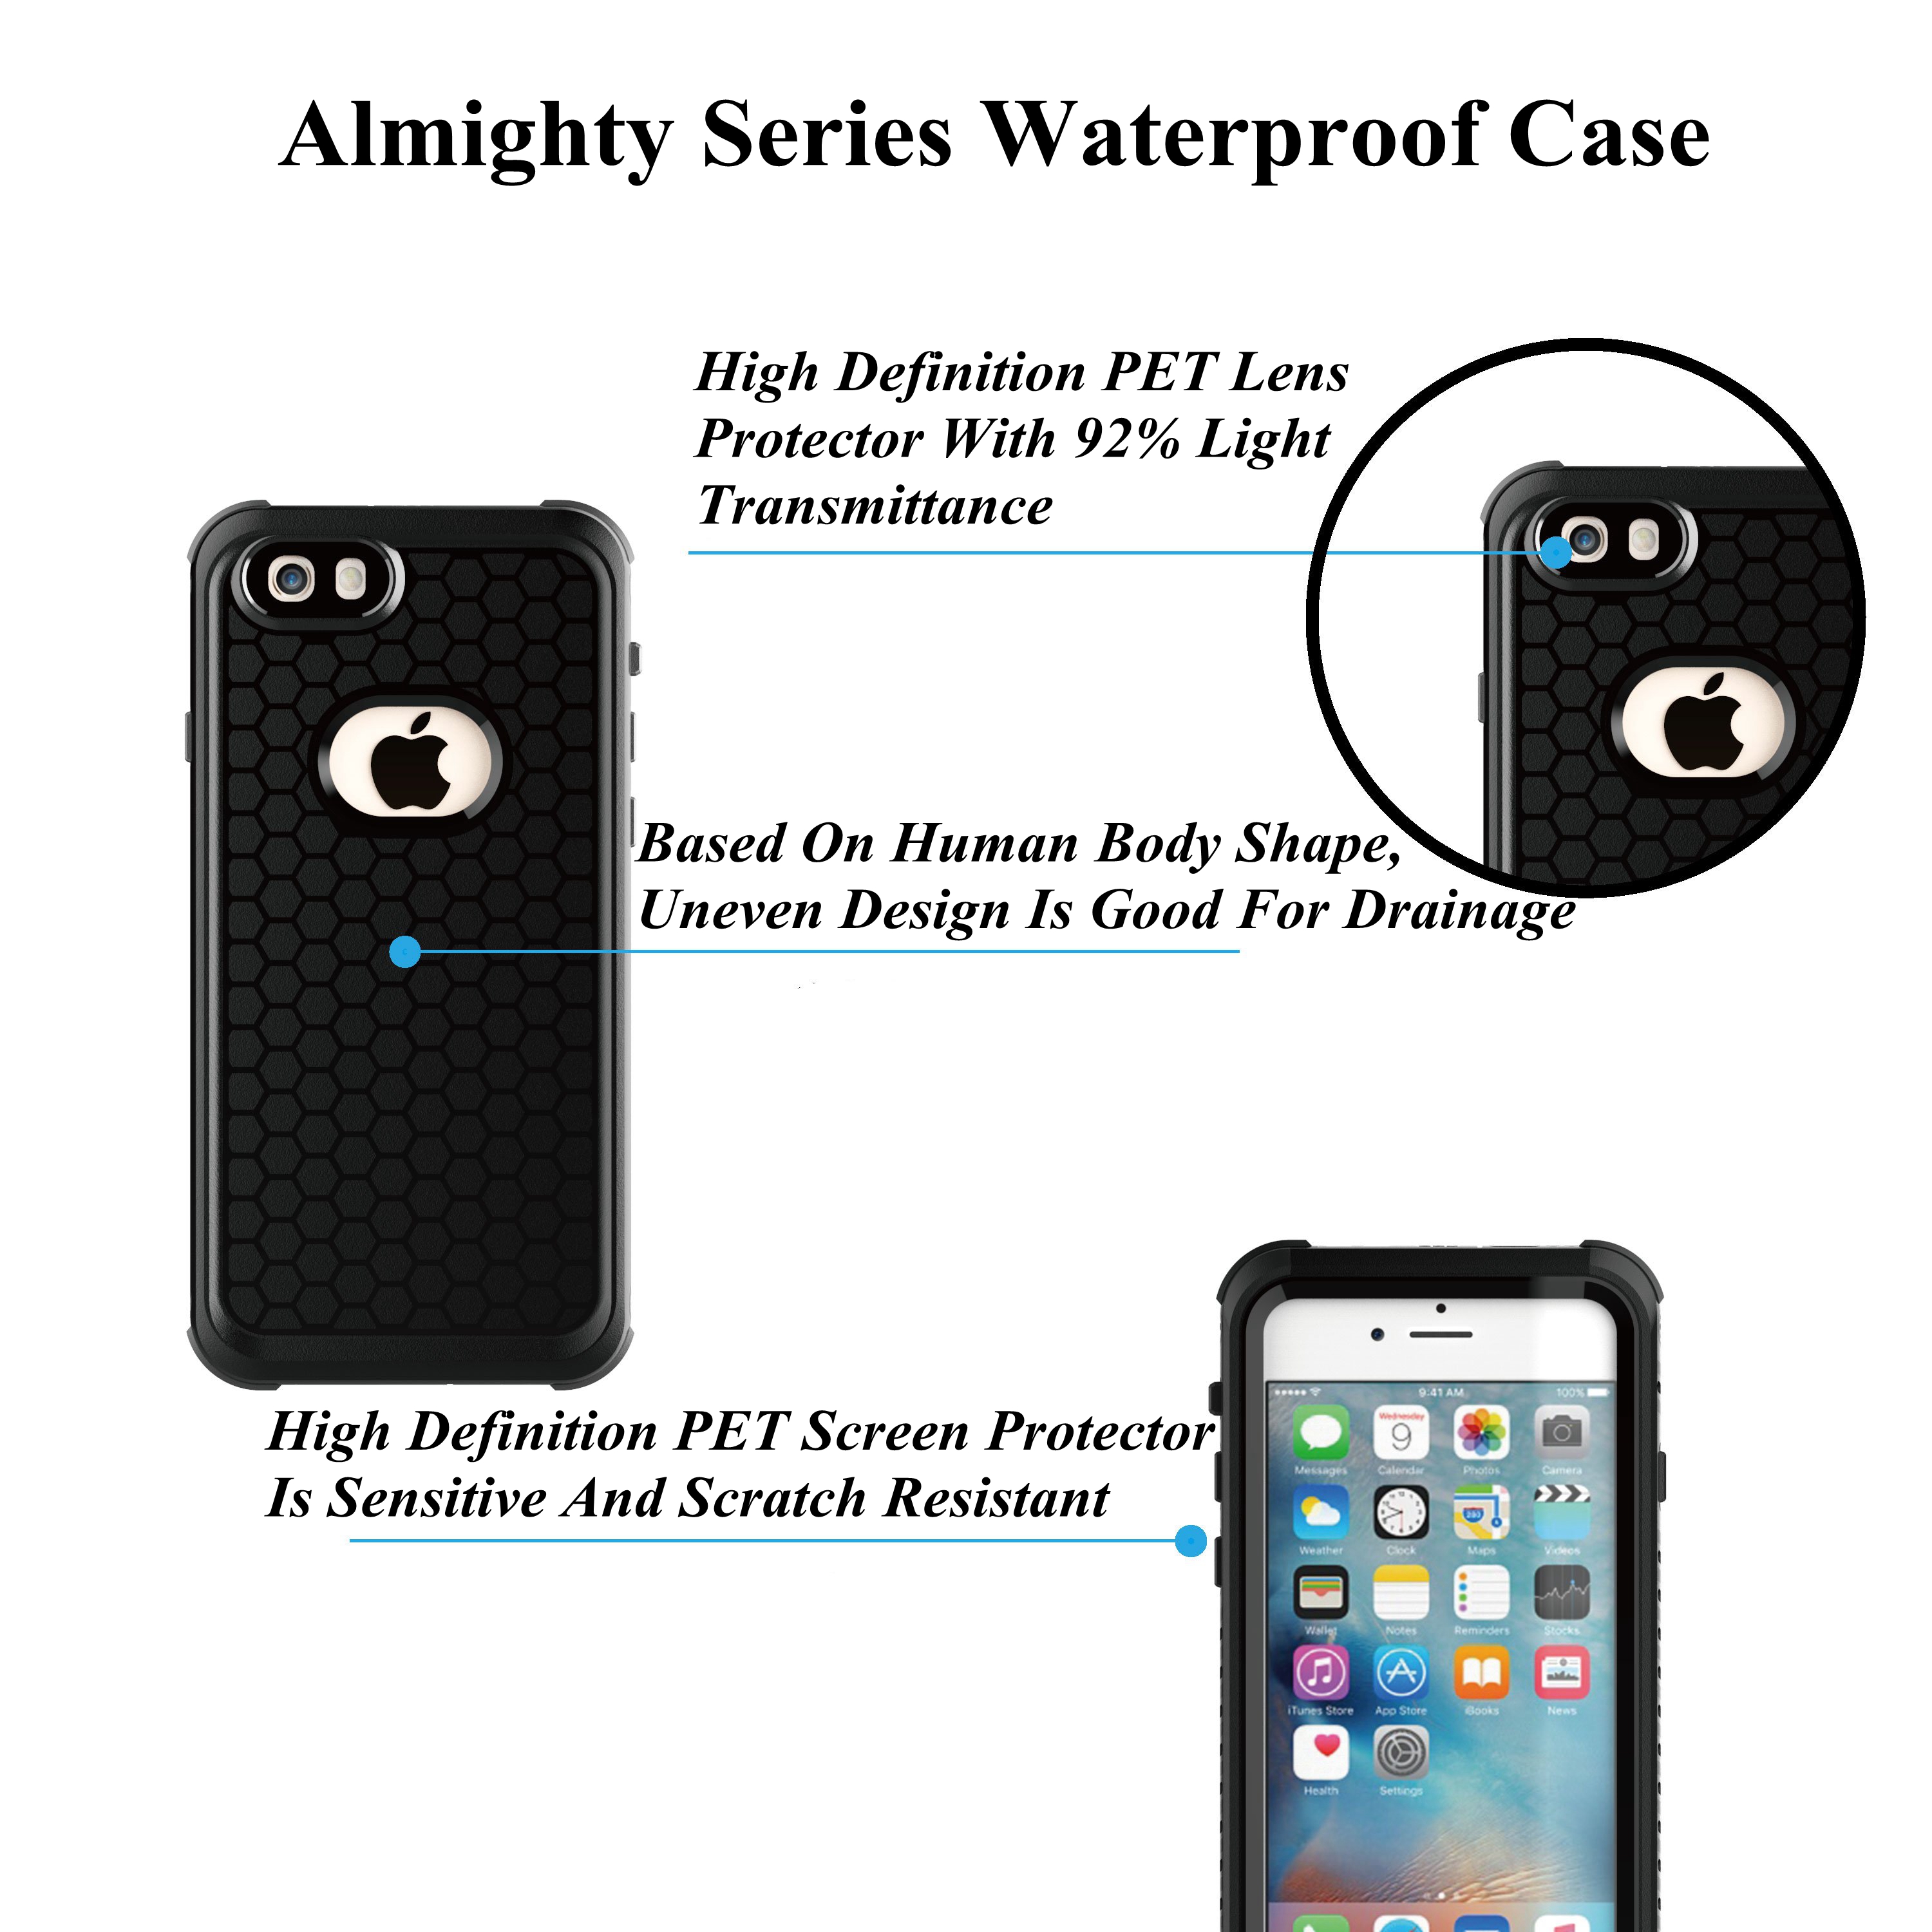 IP68-Waterproof-Swimming-Diving-Case-For-iPhone-7iPhone-8-1131500-3